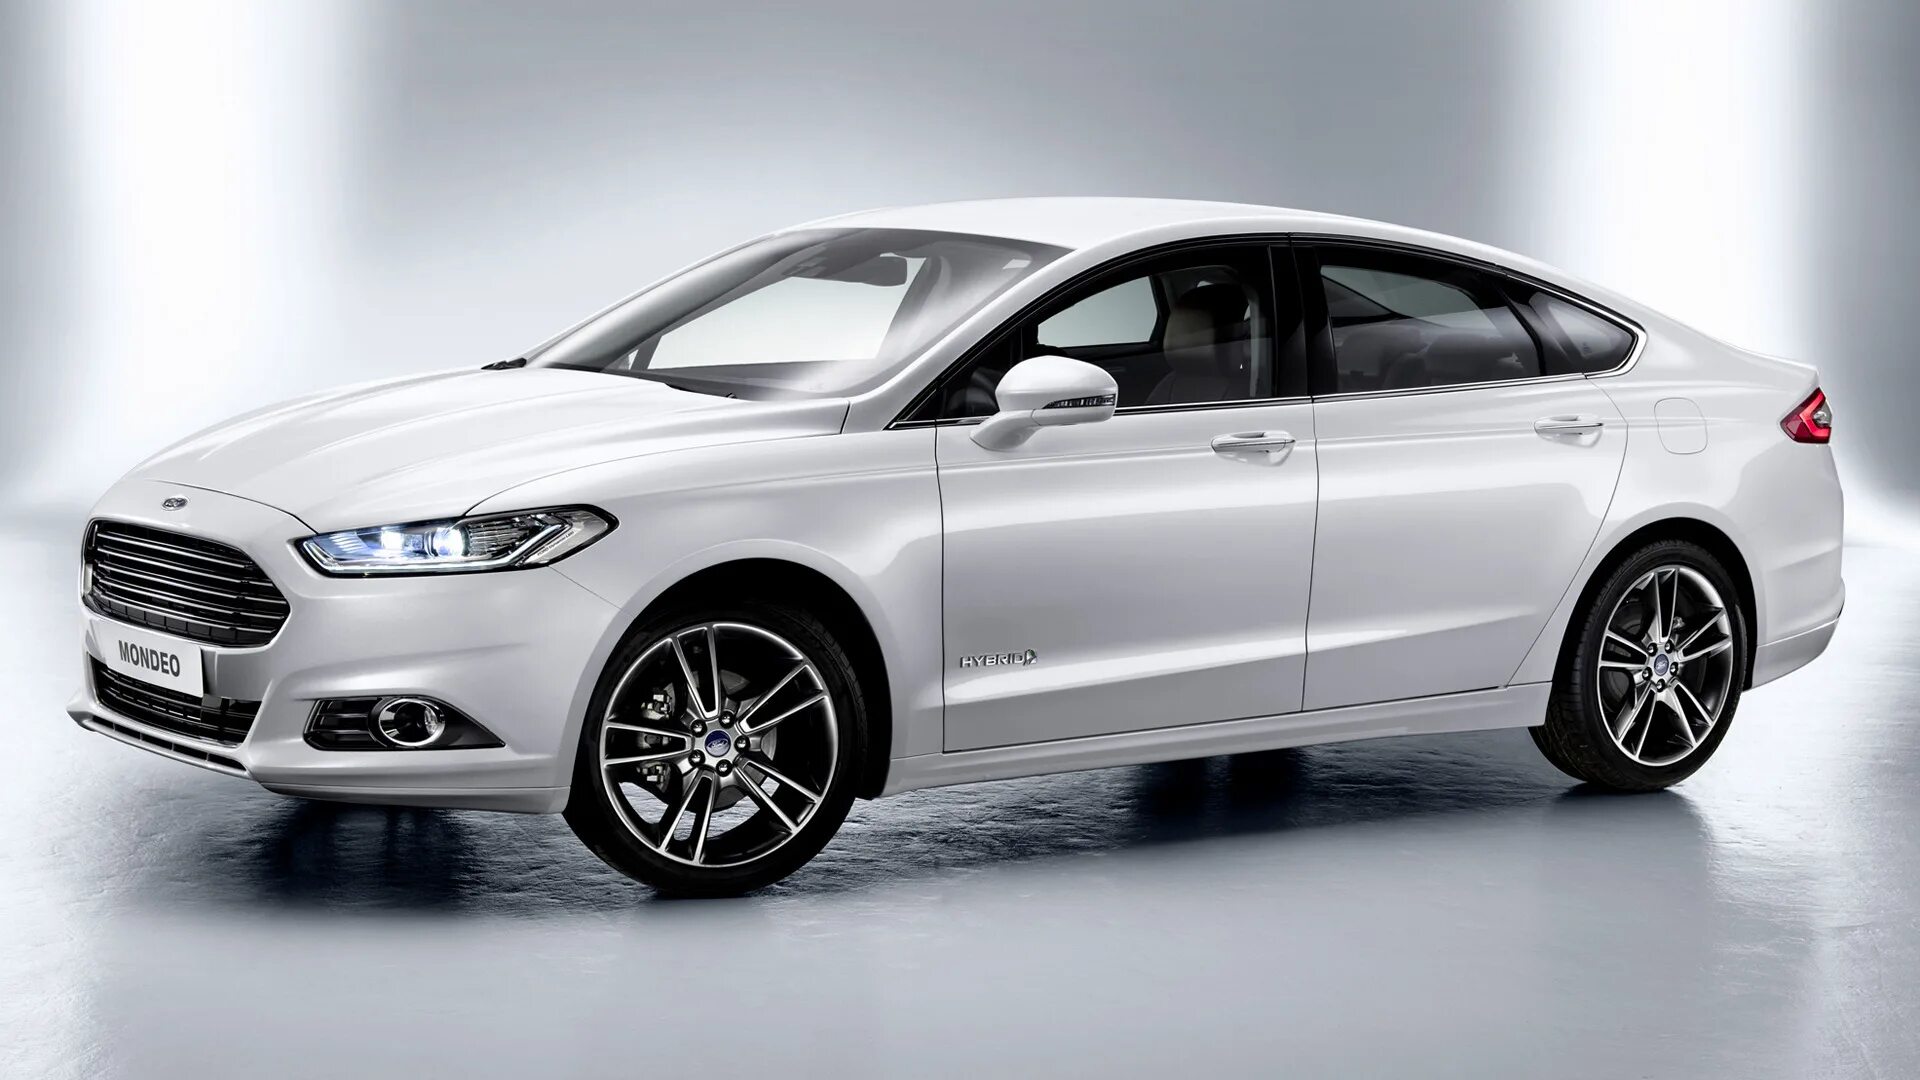 Ford Mondeo 5. Ford Mondeo 2021 седан. Форд Мондео 2021 седан. Ford Mondeo 2013.